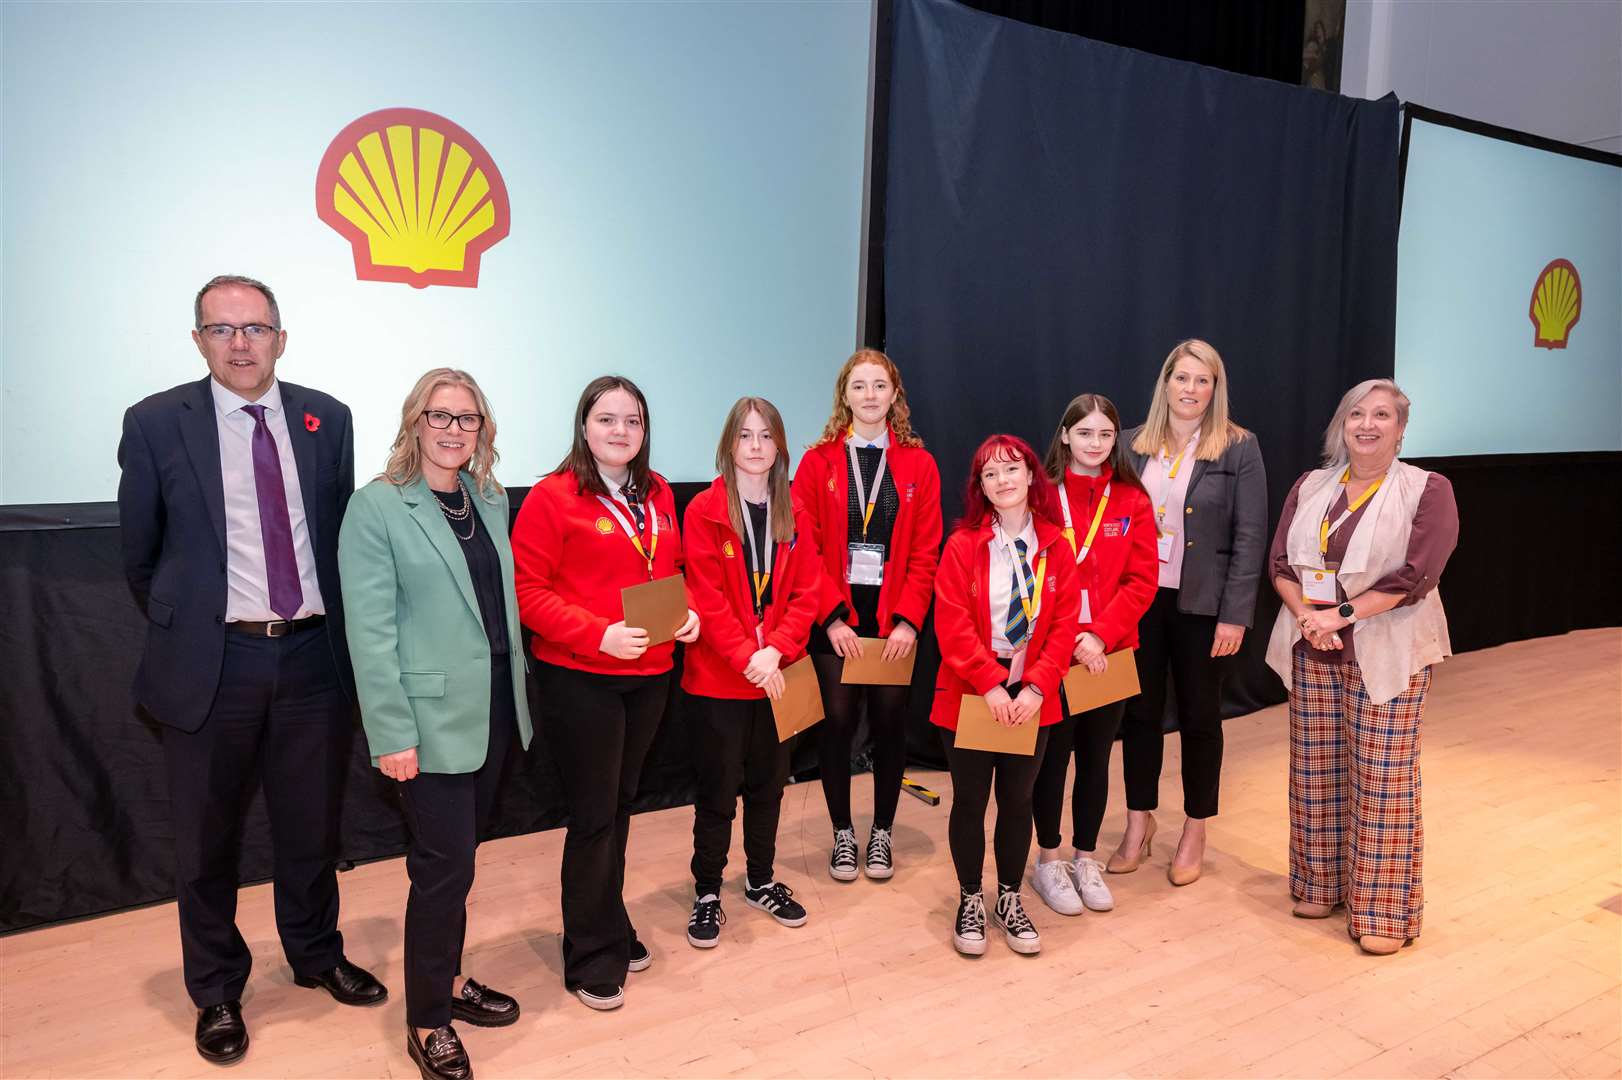 The winning team Katie Kelman, Ellie Grant, Erin Hay, Seren Murray and Lottie Gray, pictured with Simon Roddy, senior vice-president upstream at Shell UK, and the judges Gillian Martin, Minister for Energy and the Environment, Professor Lesley Sloss and Lucy Ferguson from Shell.